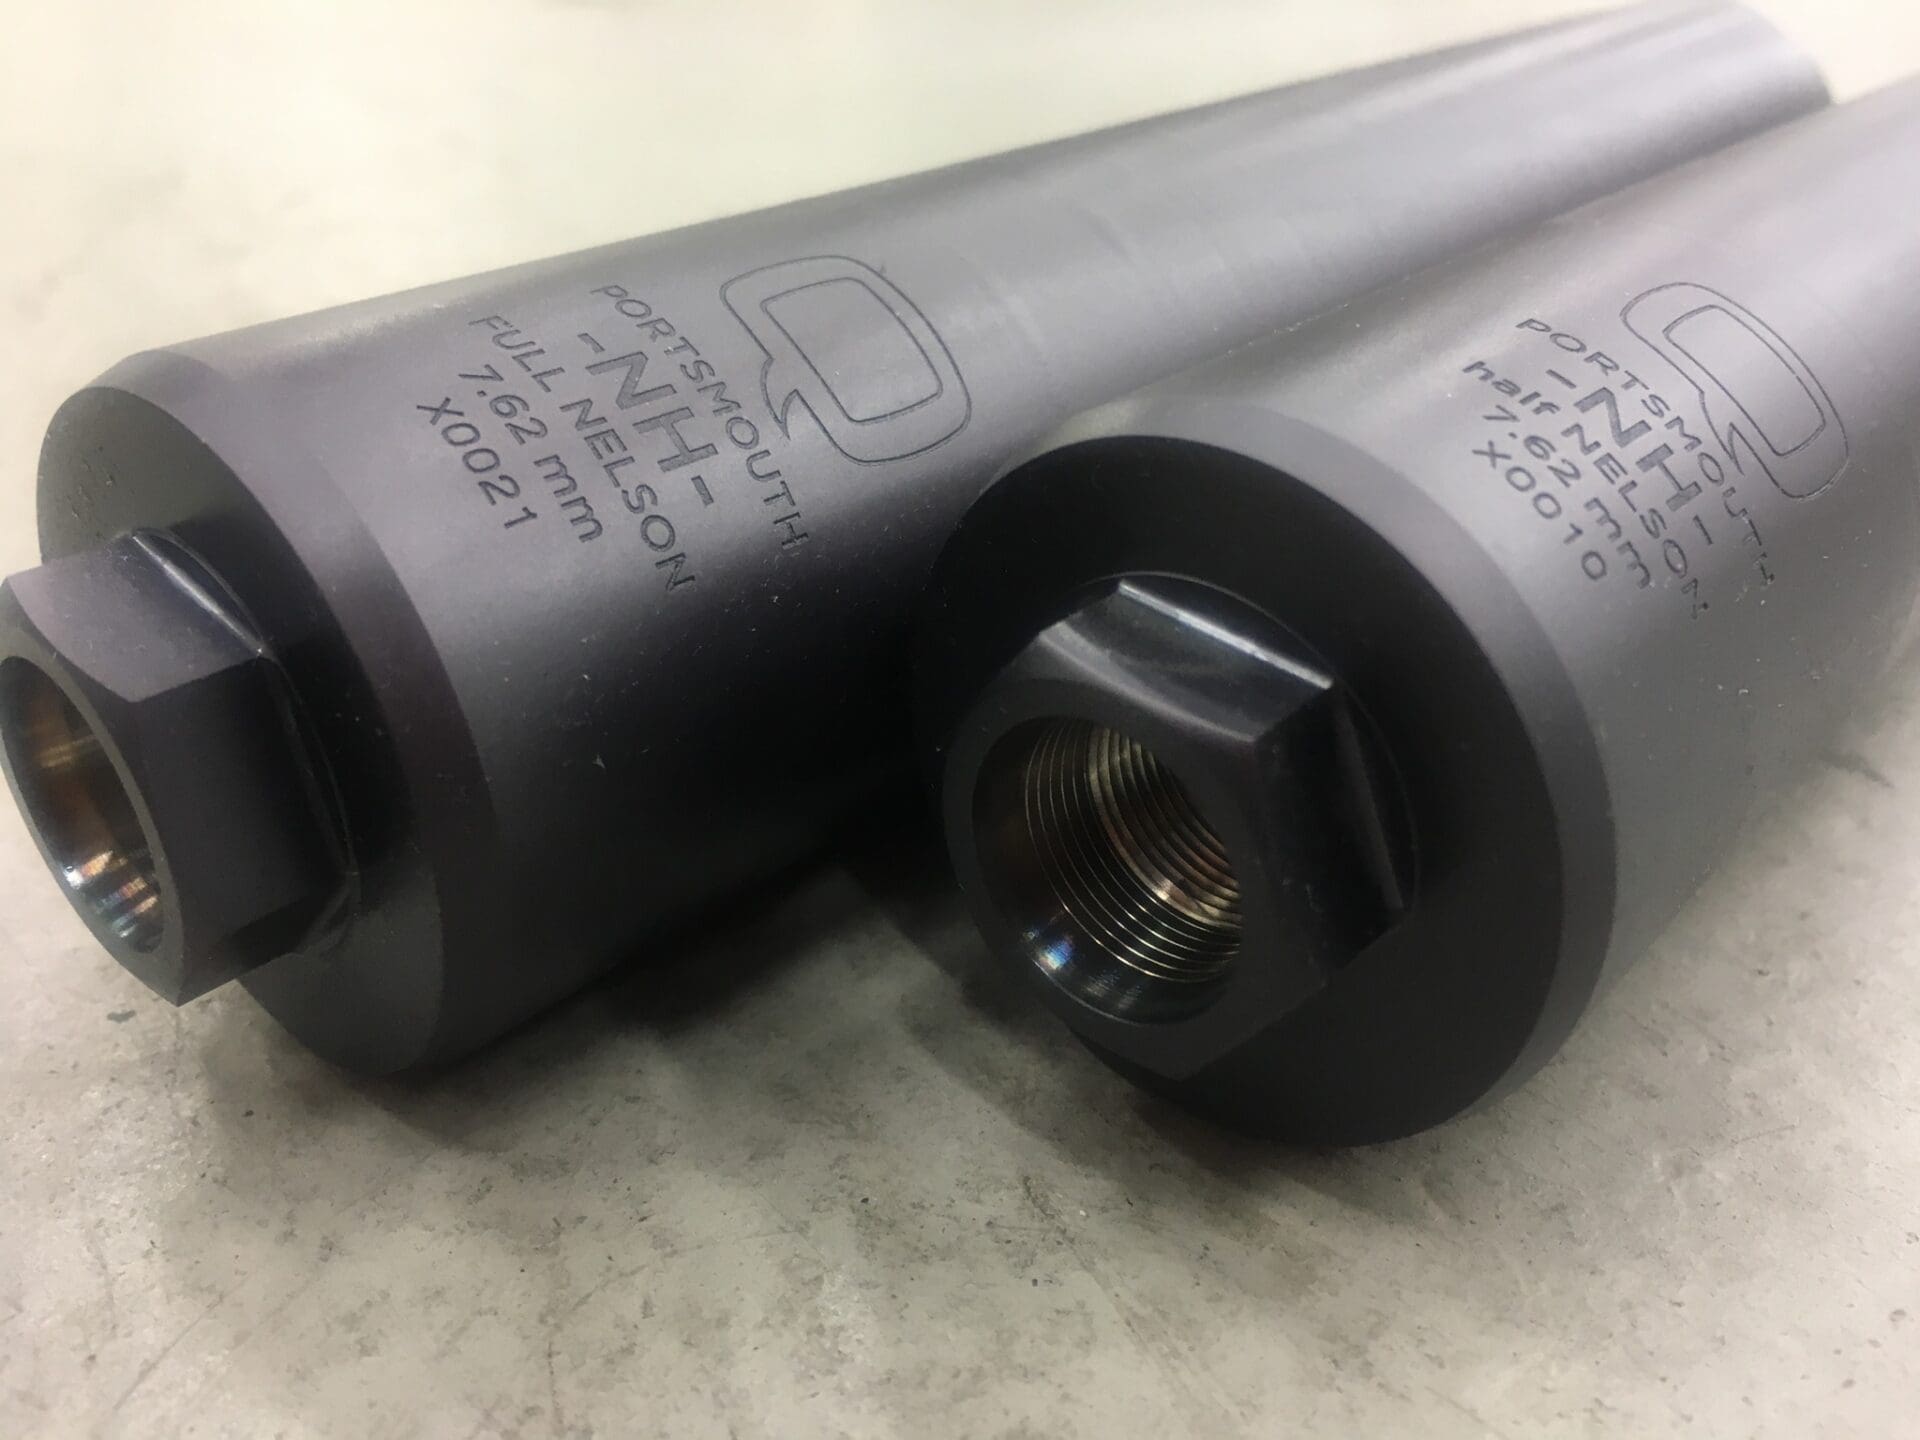 q-launches-direct-thread-silencers-with-actual-200-rebate-the-truth